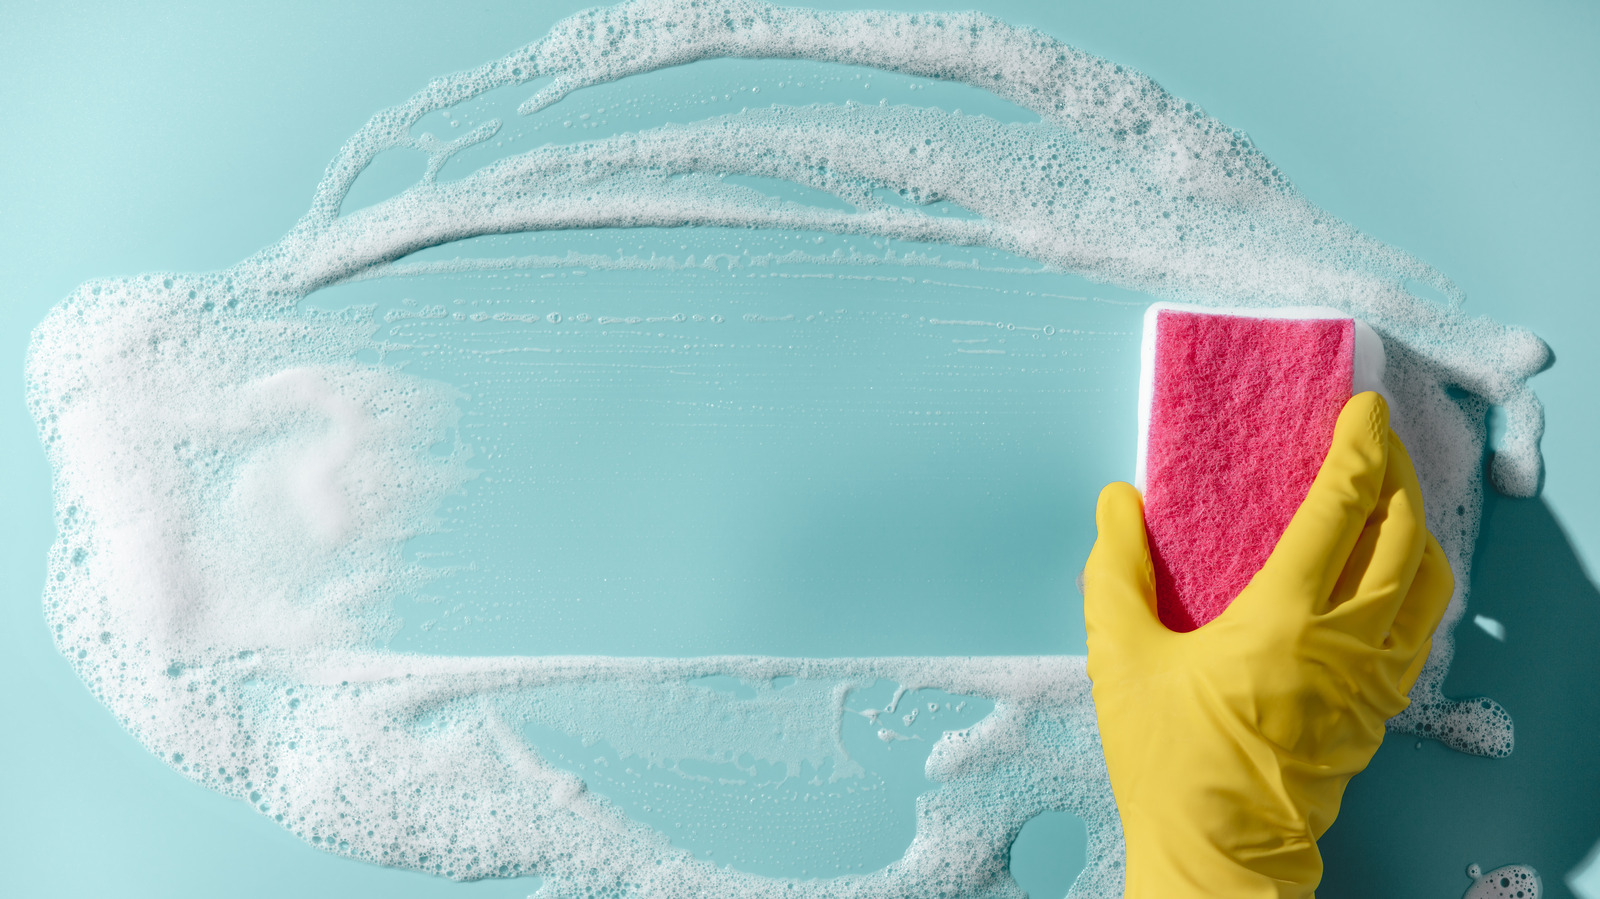 How Dirty Is Your Kitchen Sponge?